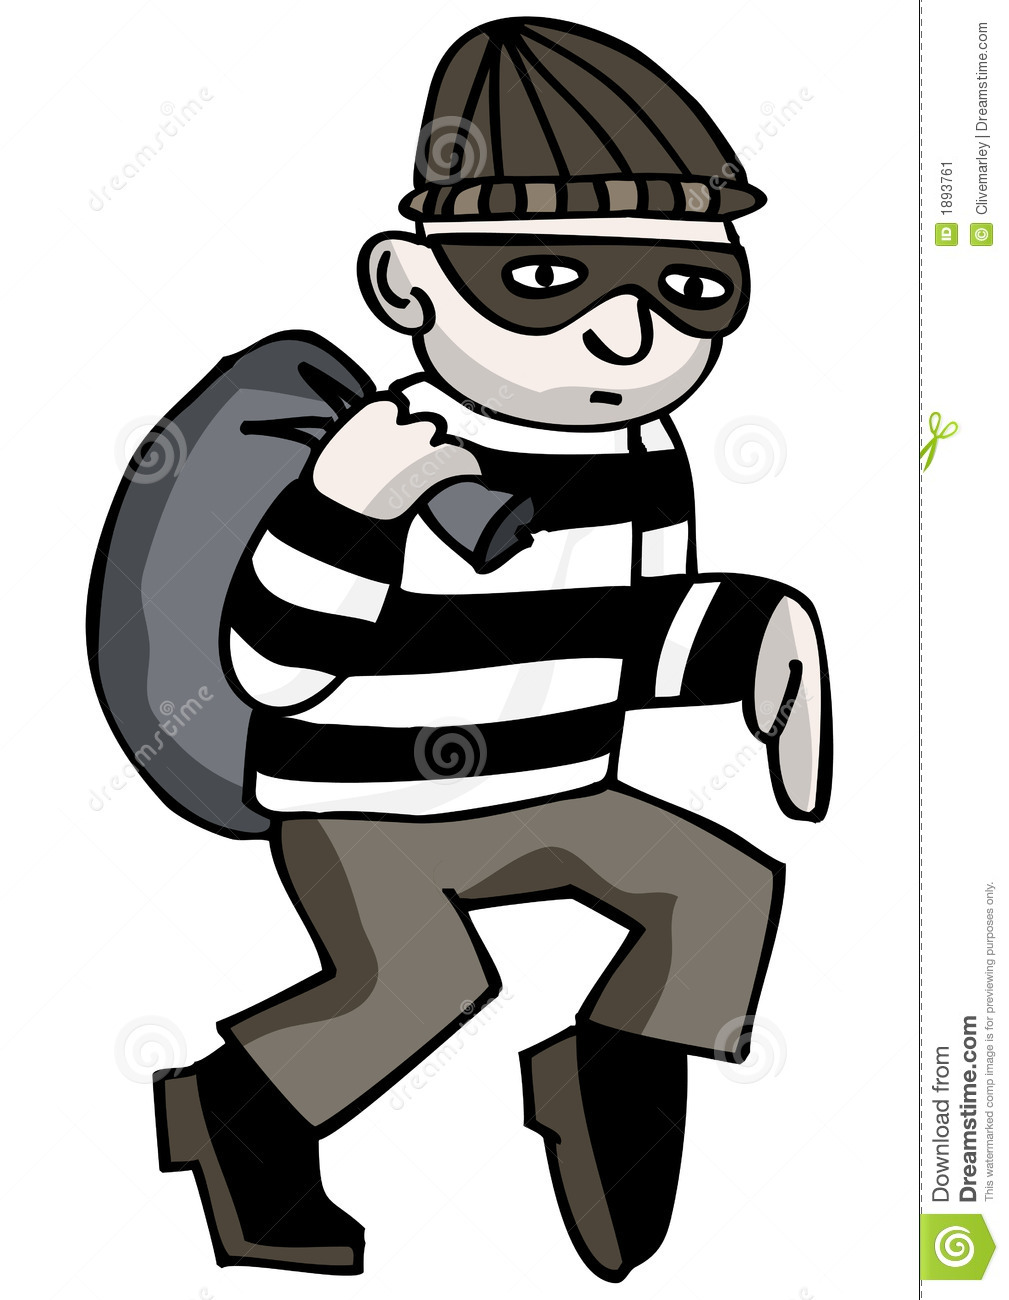 Robber Stock Image   Image  1893761